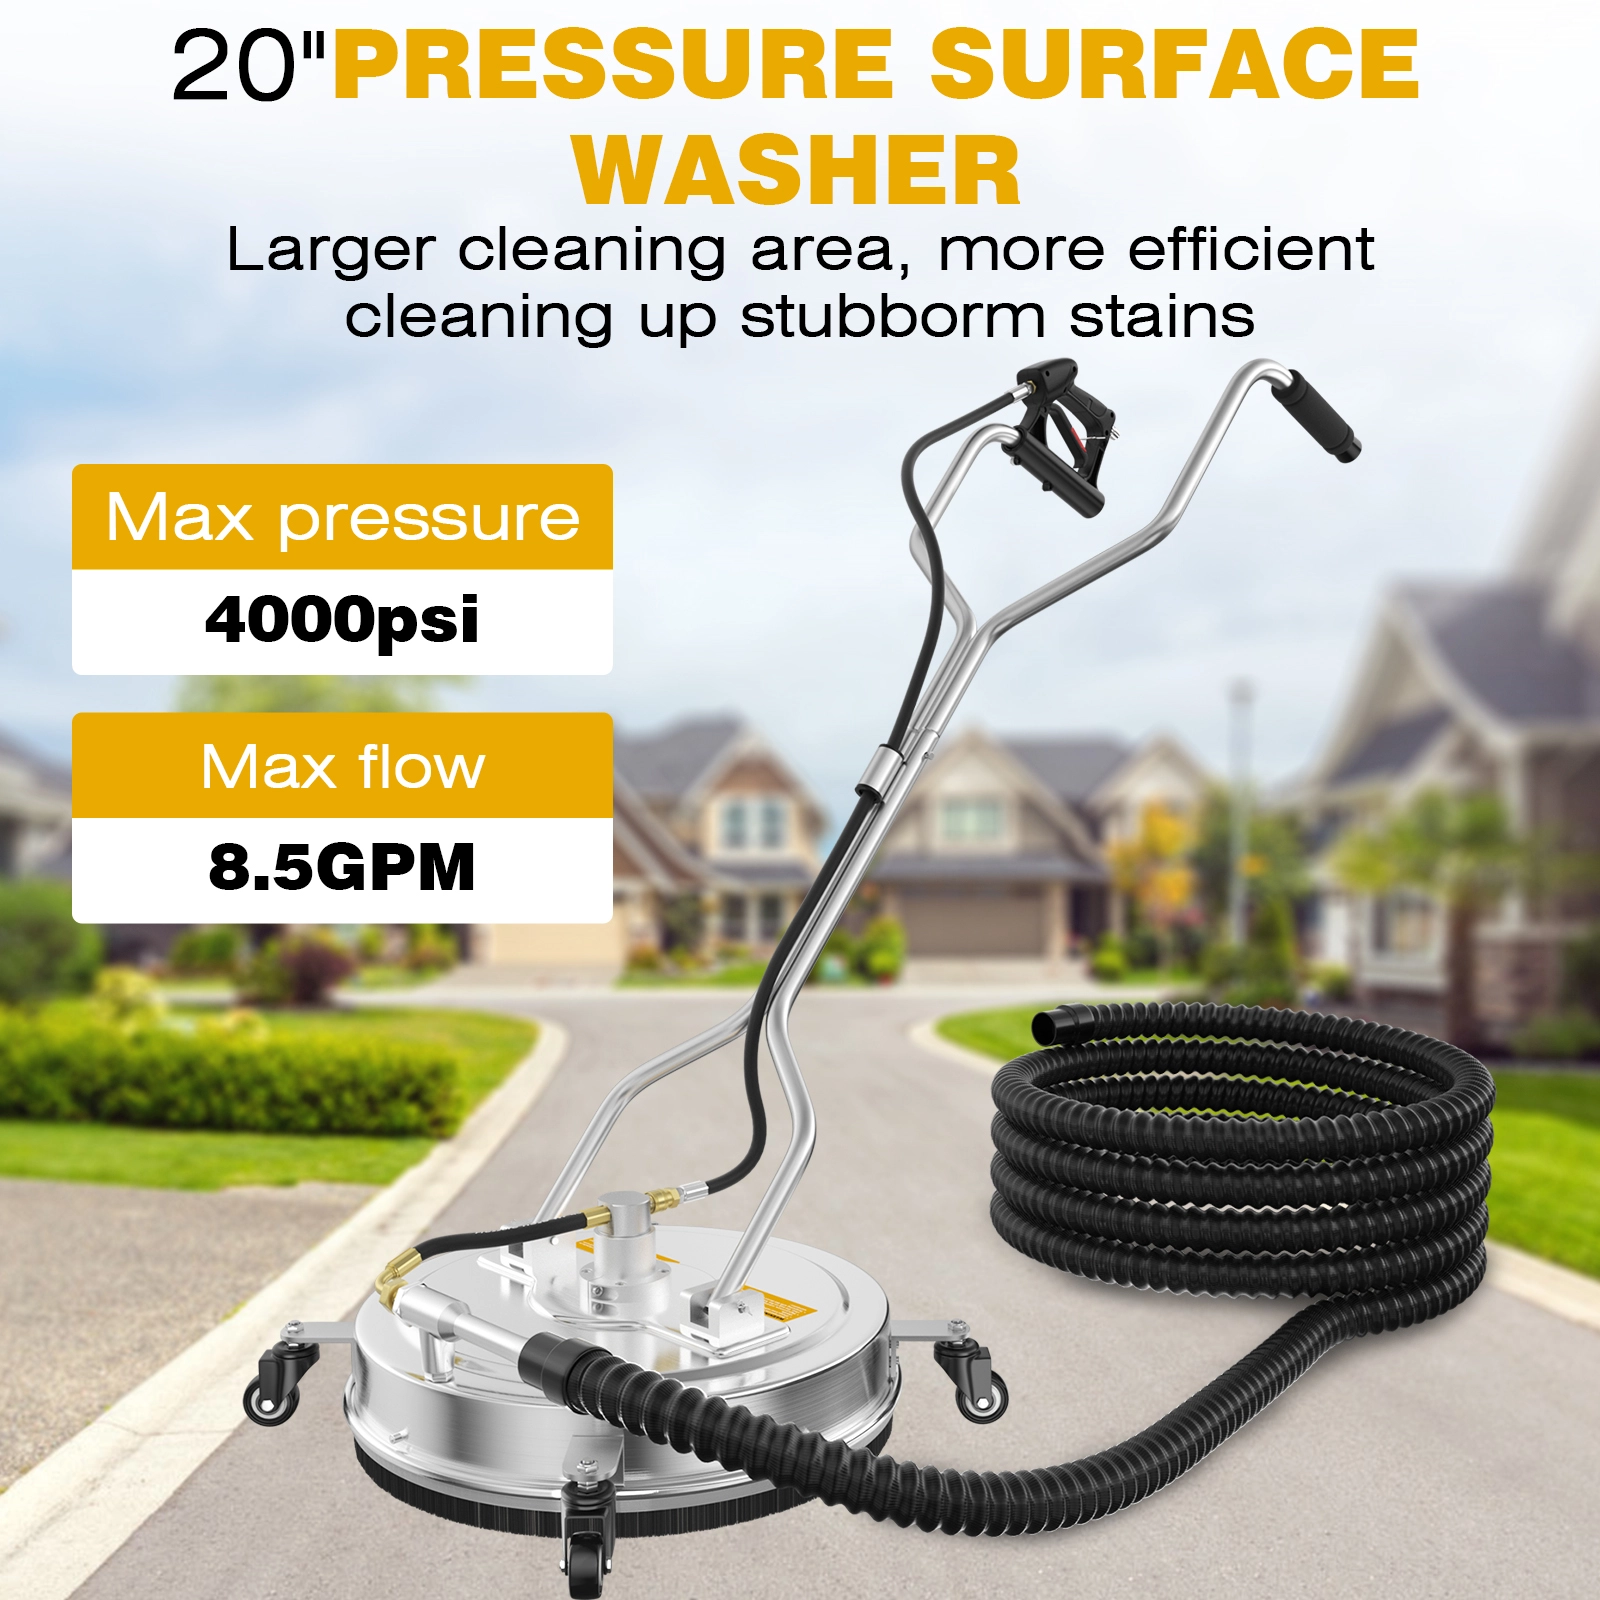 EVEAGE 20 inch Sewage Recovery Surface Cleaner Pressure Washer Dual Handle